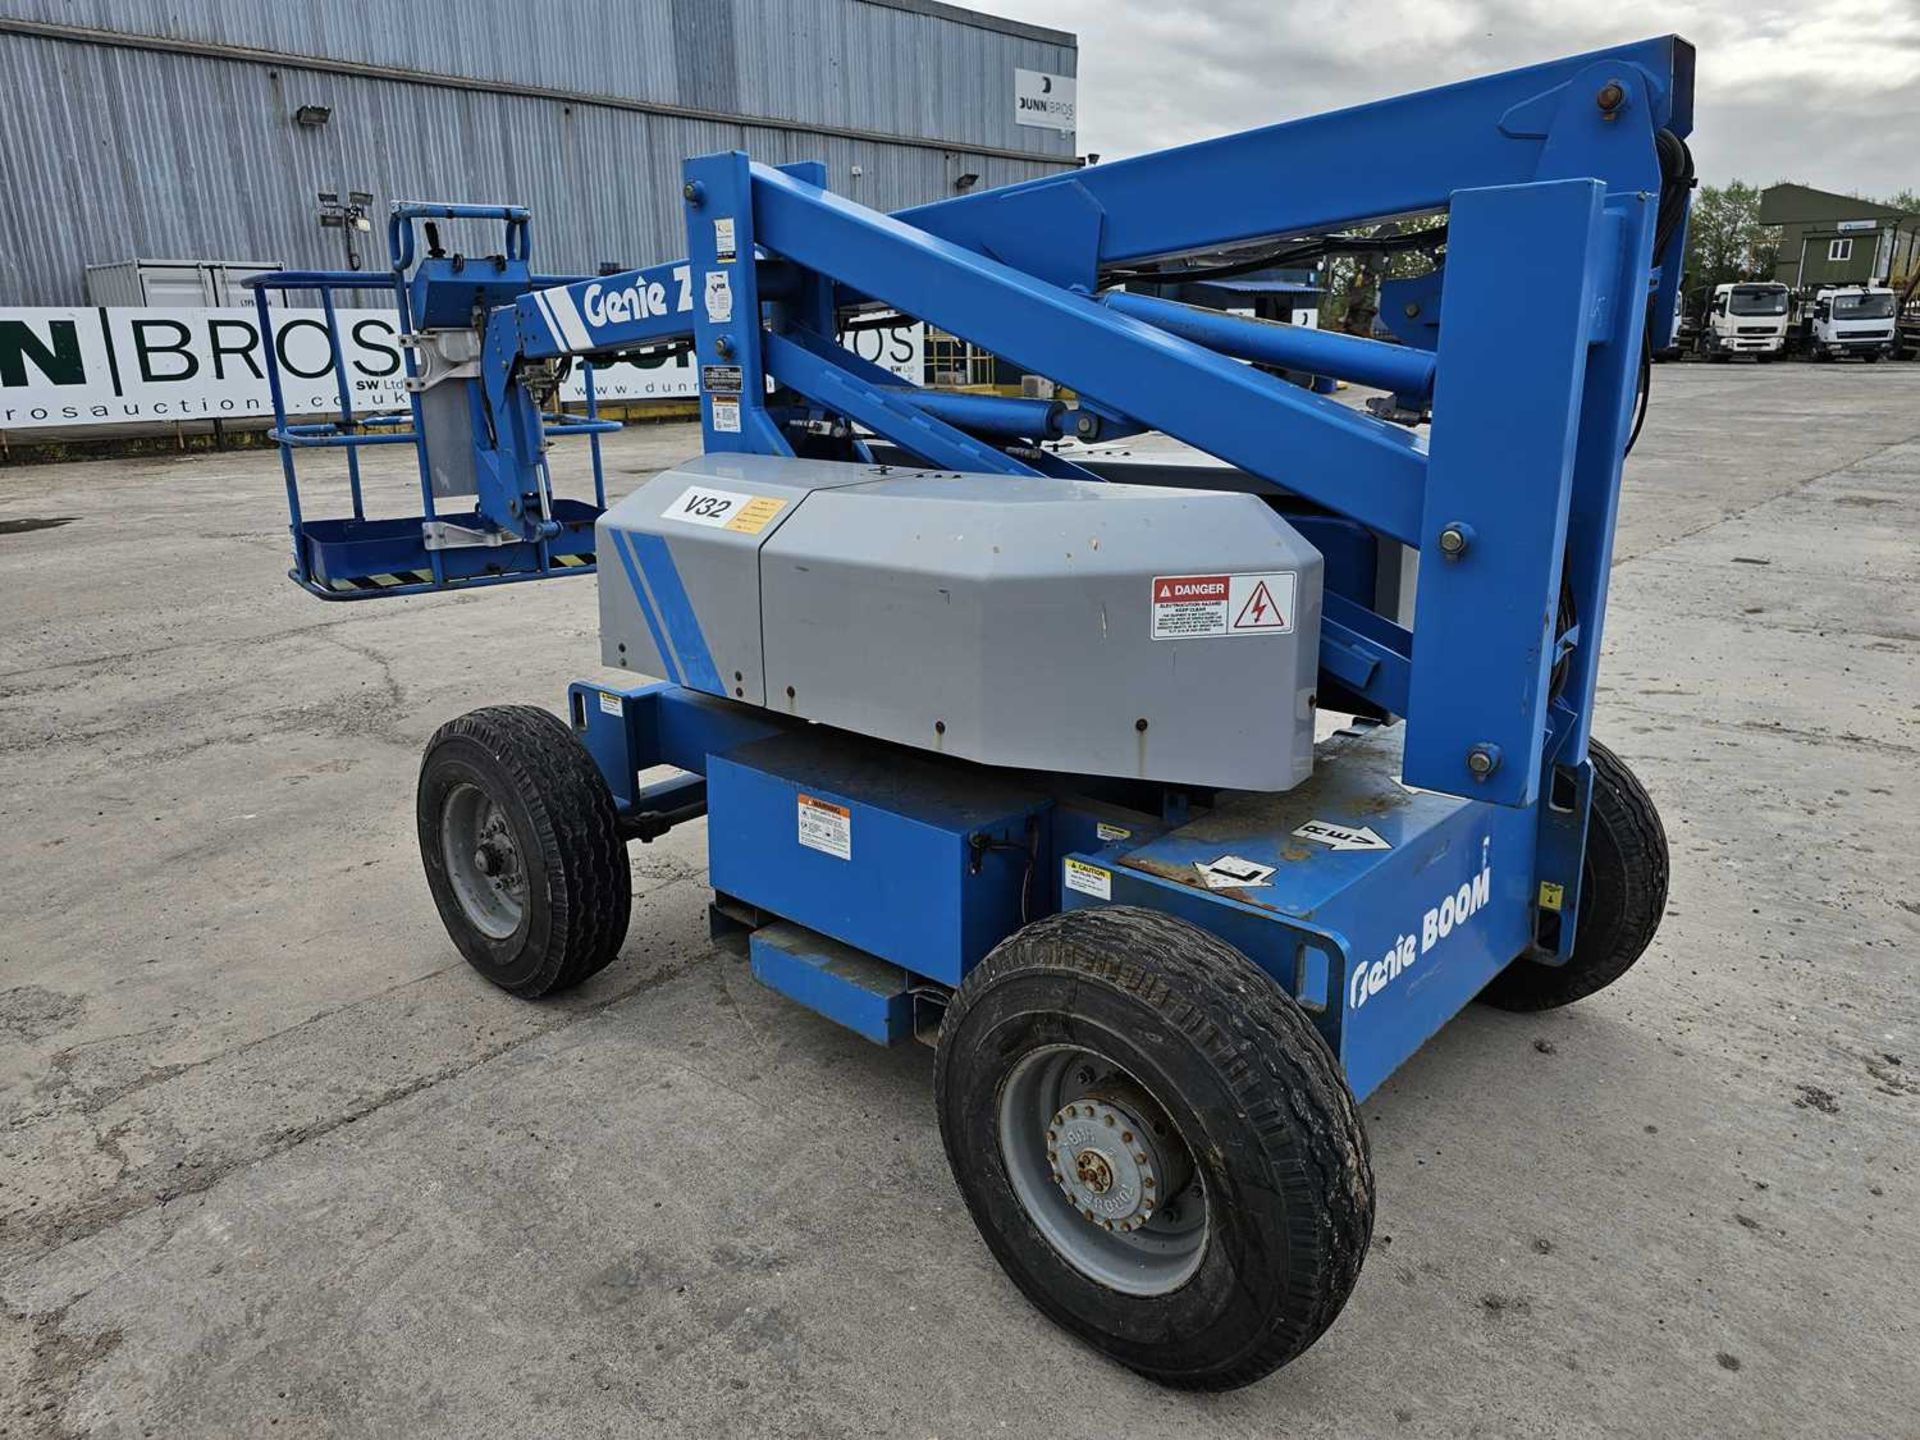 Genie Z30/20HD Wheeled Articulated Electric Scissor Lift Access Platform - Image 4 of 17